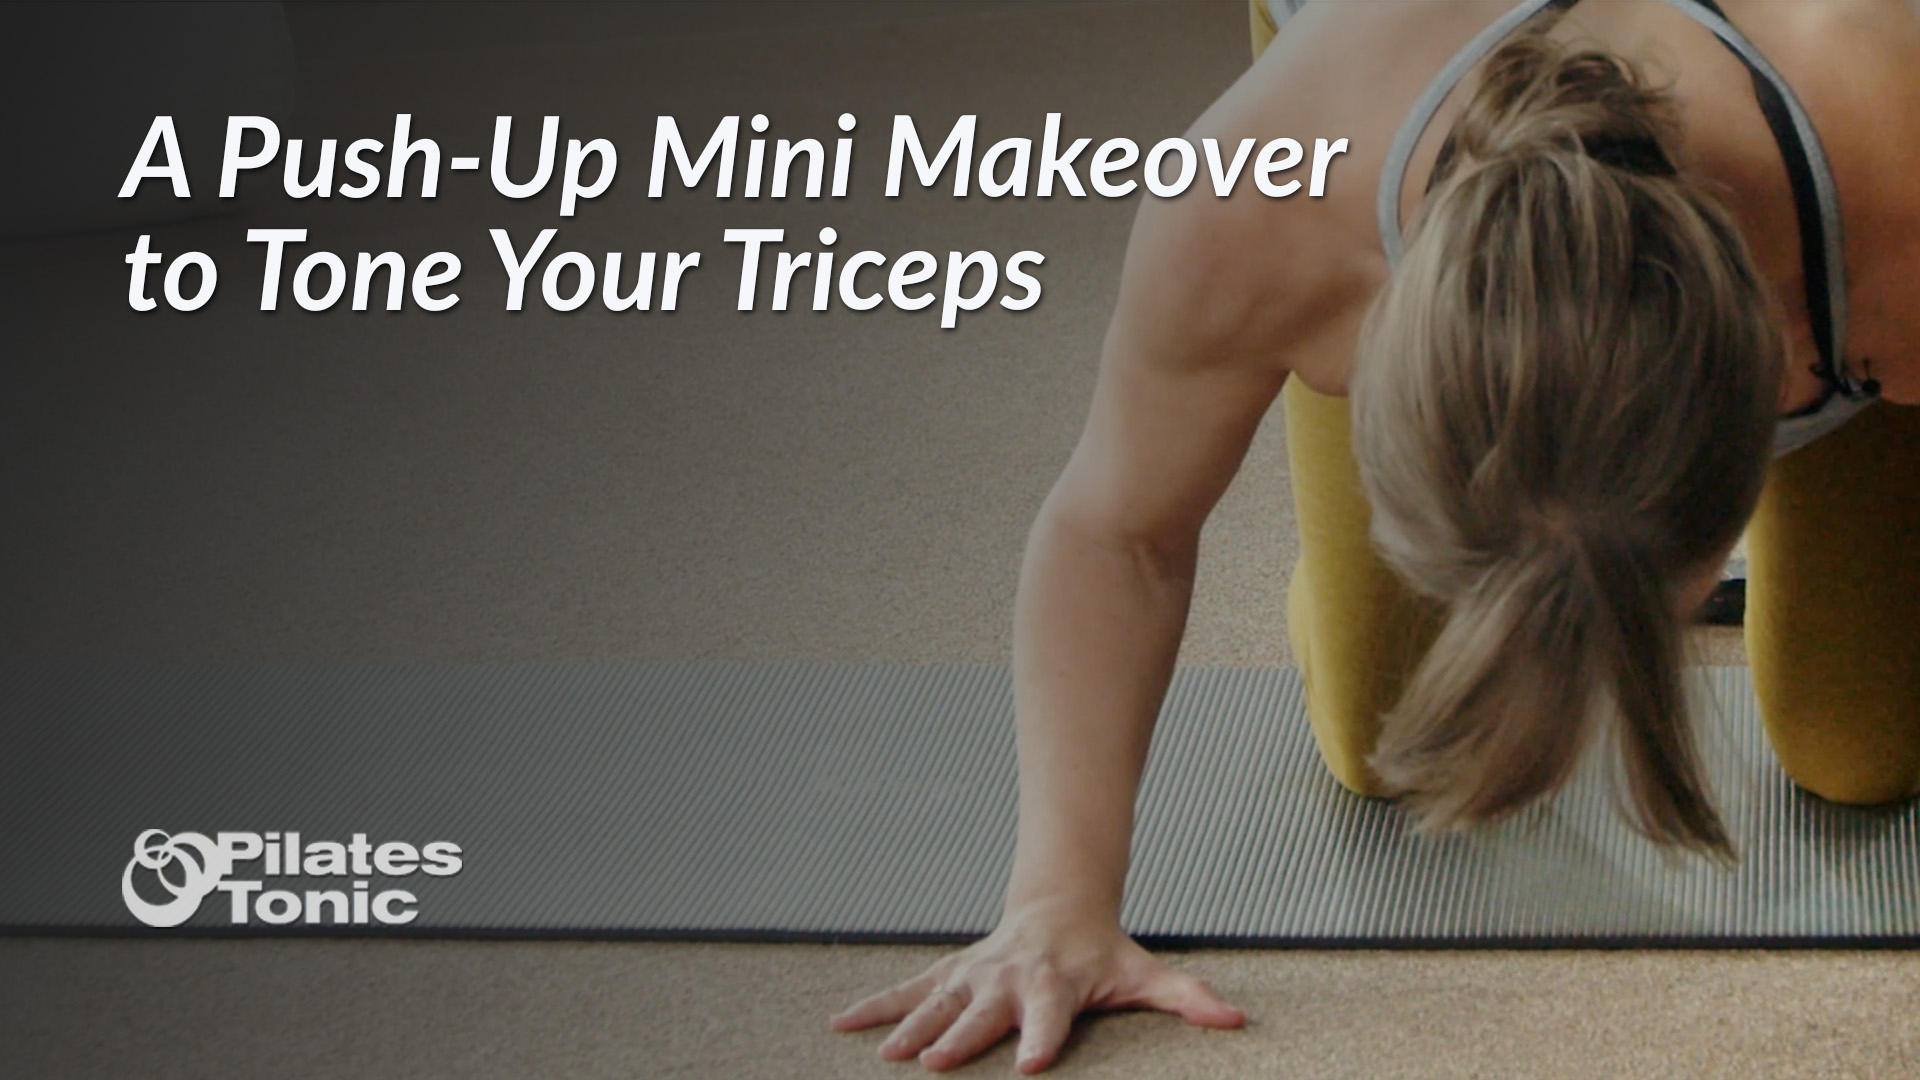 A Push-Up Mini Makeover to Tone Your Triceps